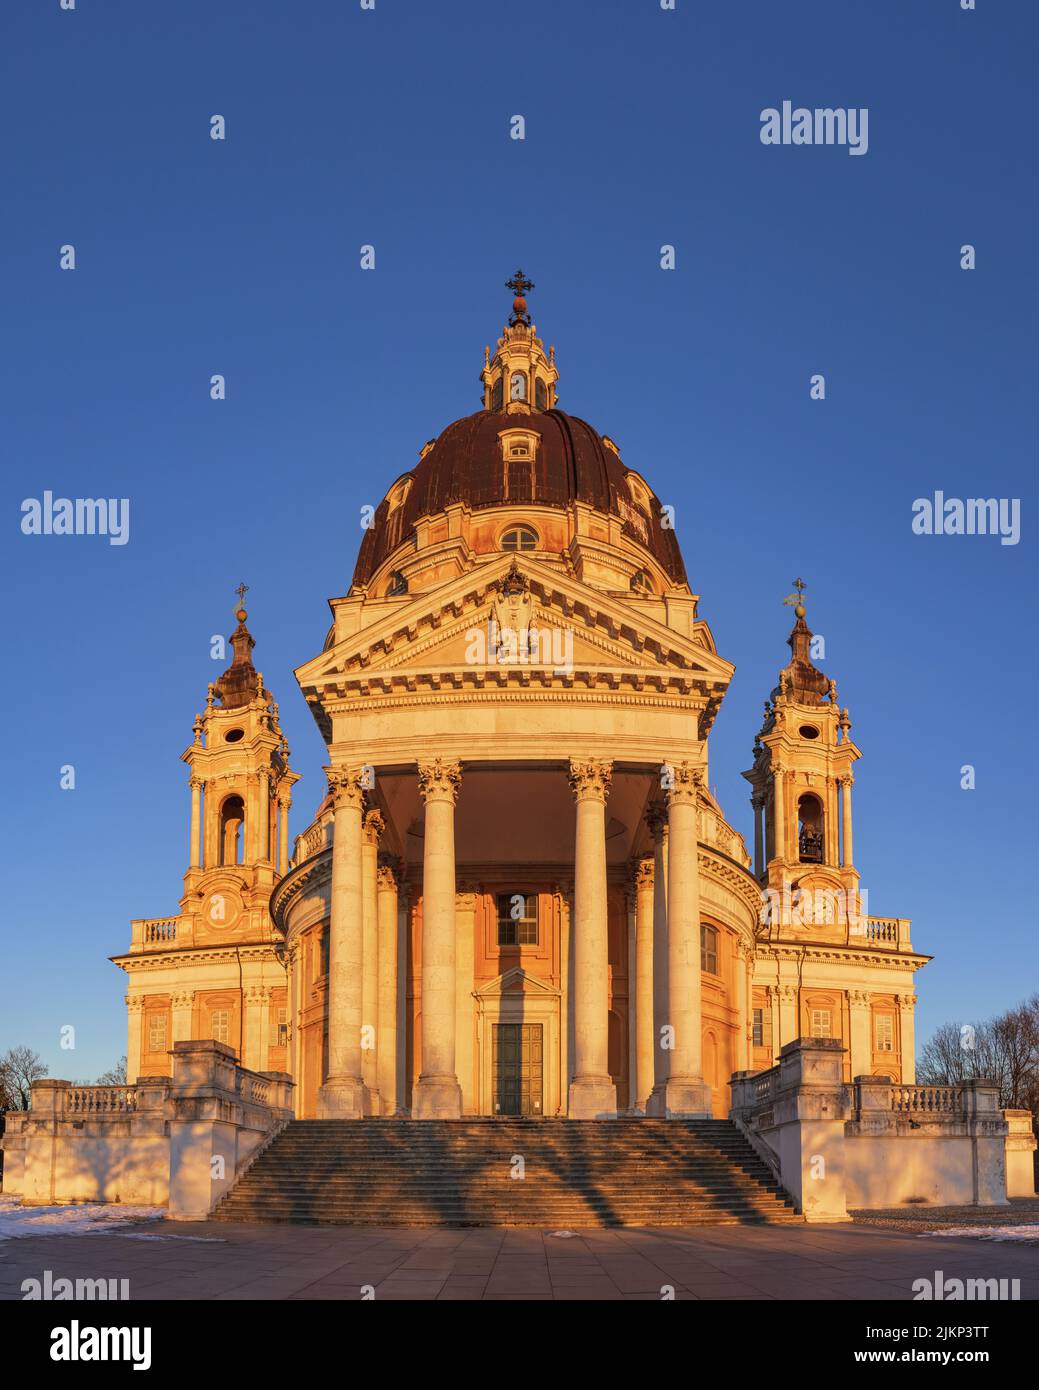 A vertical shot of the Basilica of Superga under a clear sky in daylight, Italy Stock Photo